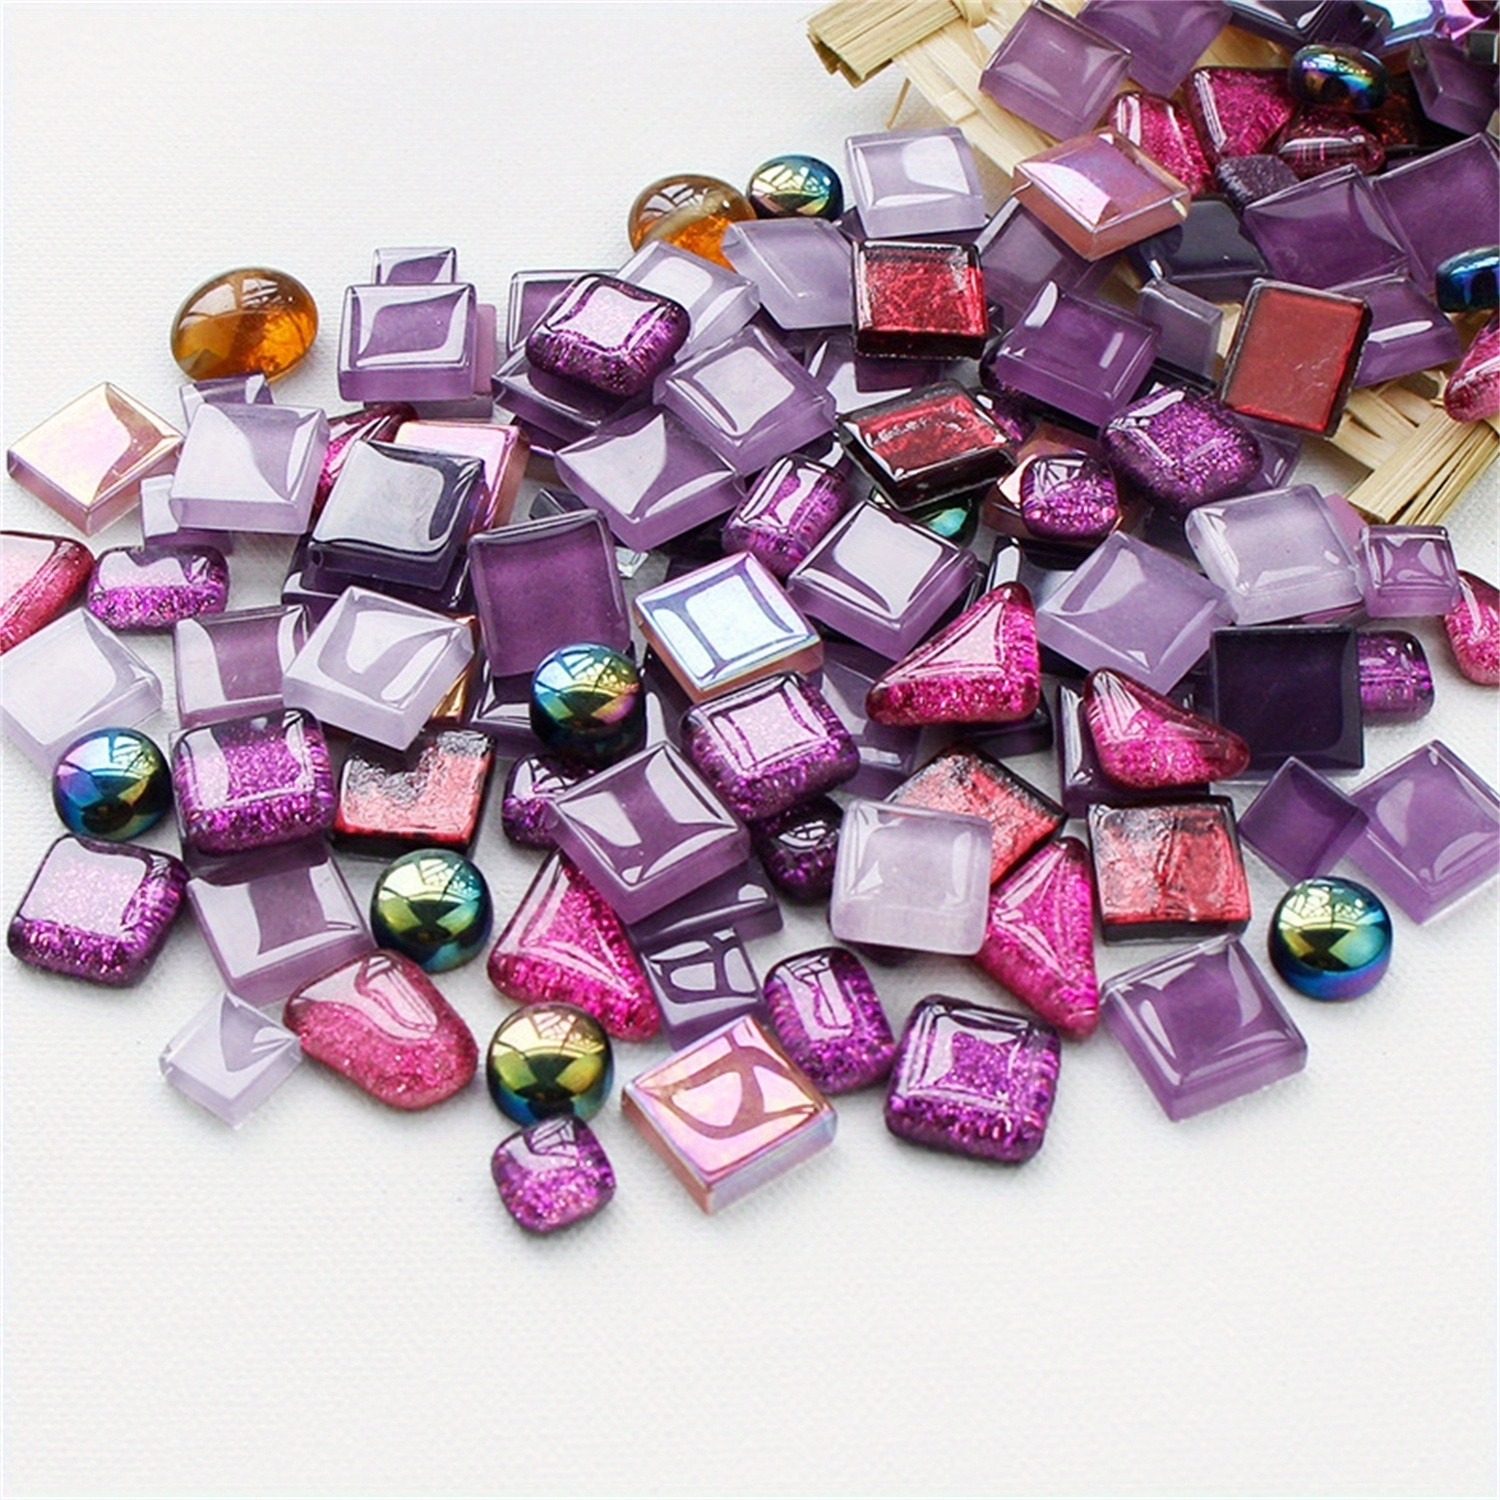 

100g Piece Purple Glitter Crystal Glass Mosaic Tiles For Diy Crafts And Jewelry Making